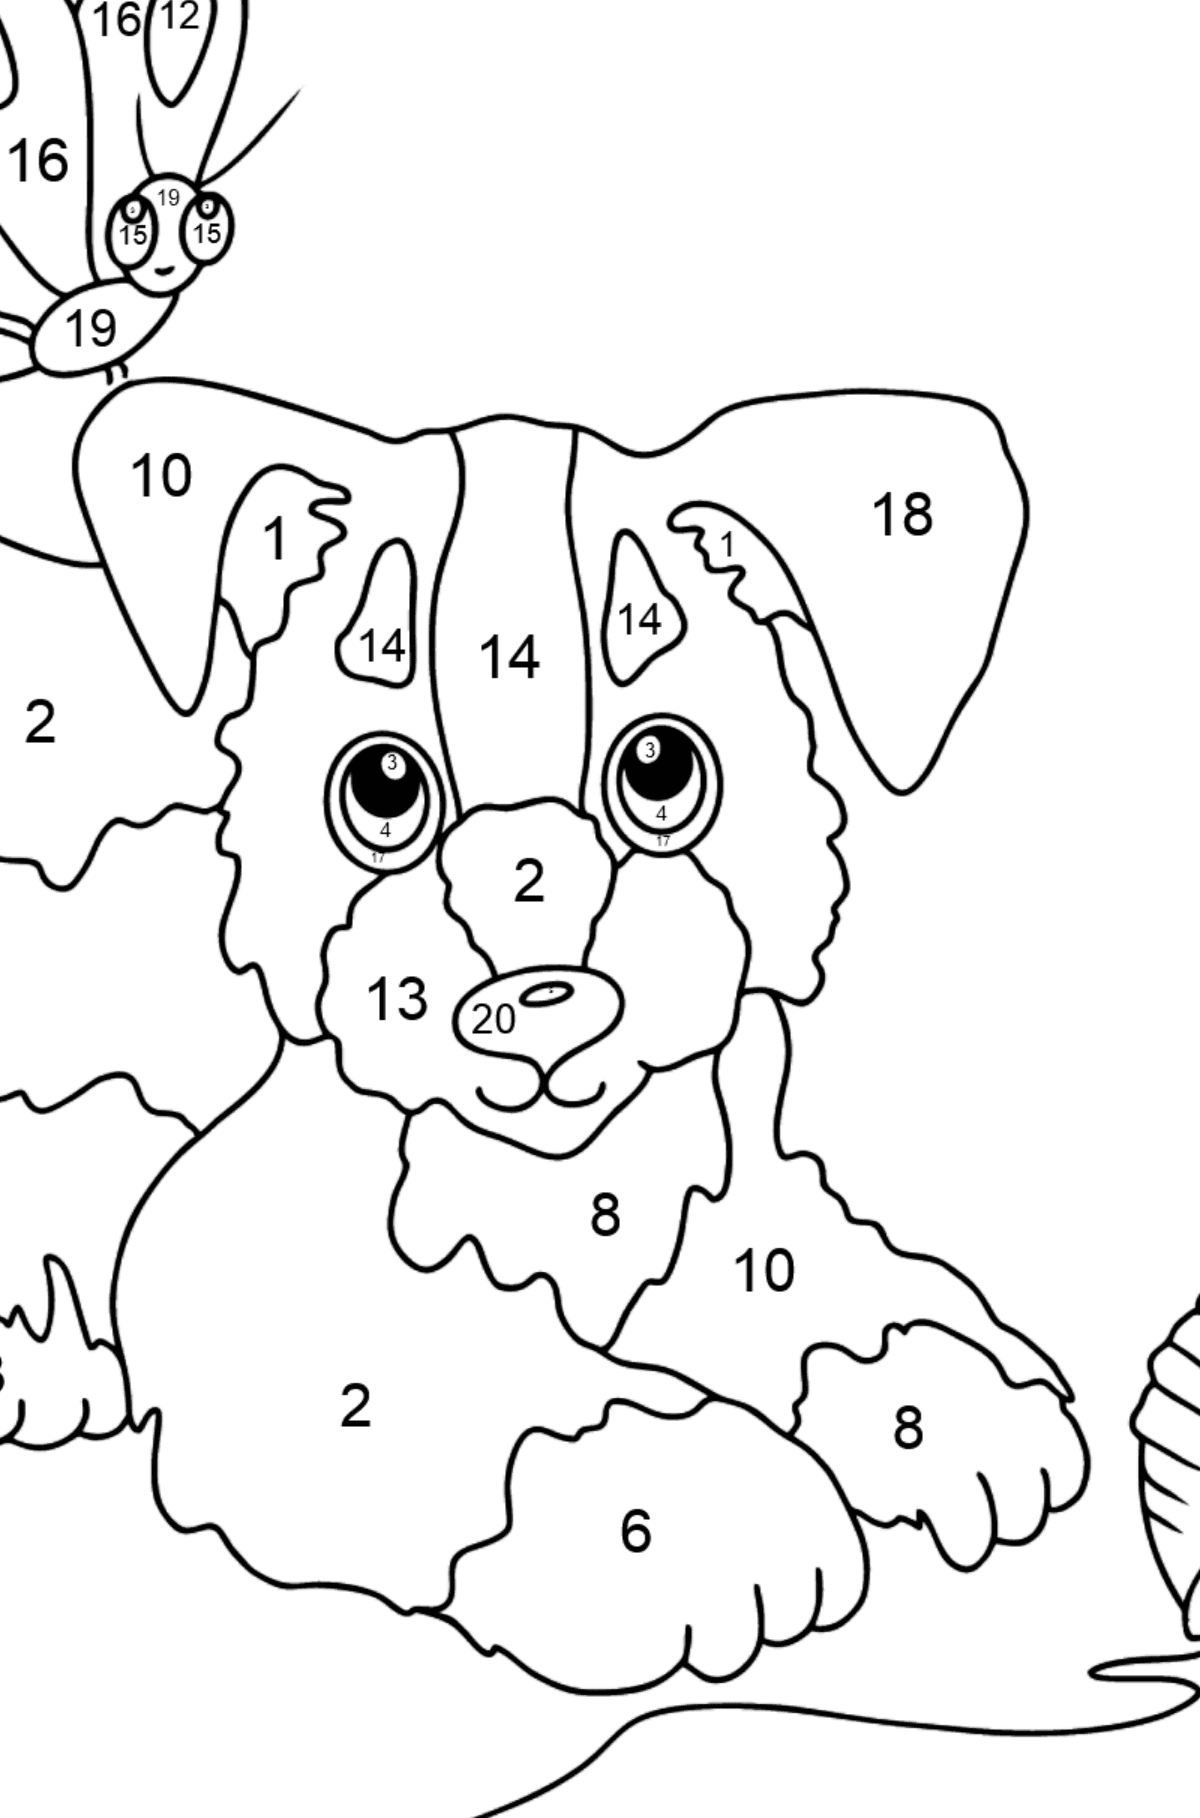 Coloring Page - A Dog is Playing with a Ball of Yarn and Butterflies - Coloring by Numbers for Kids